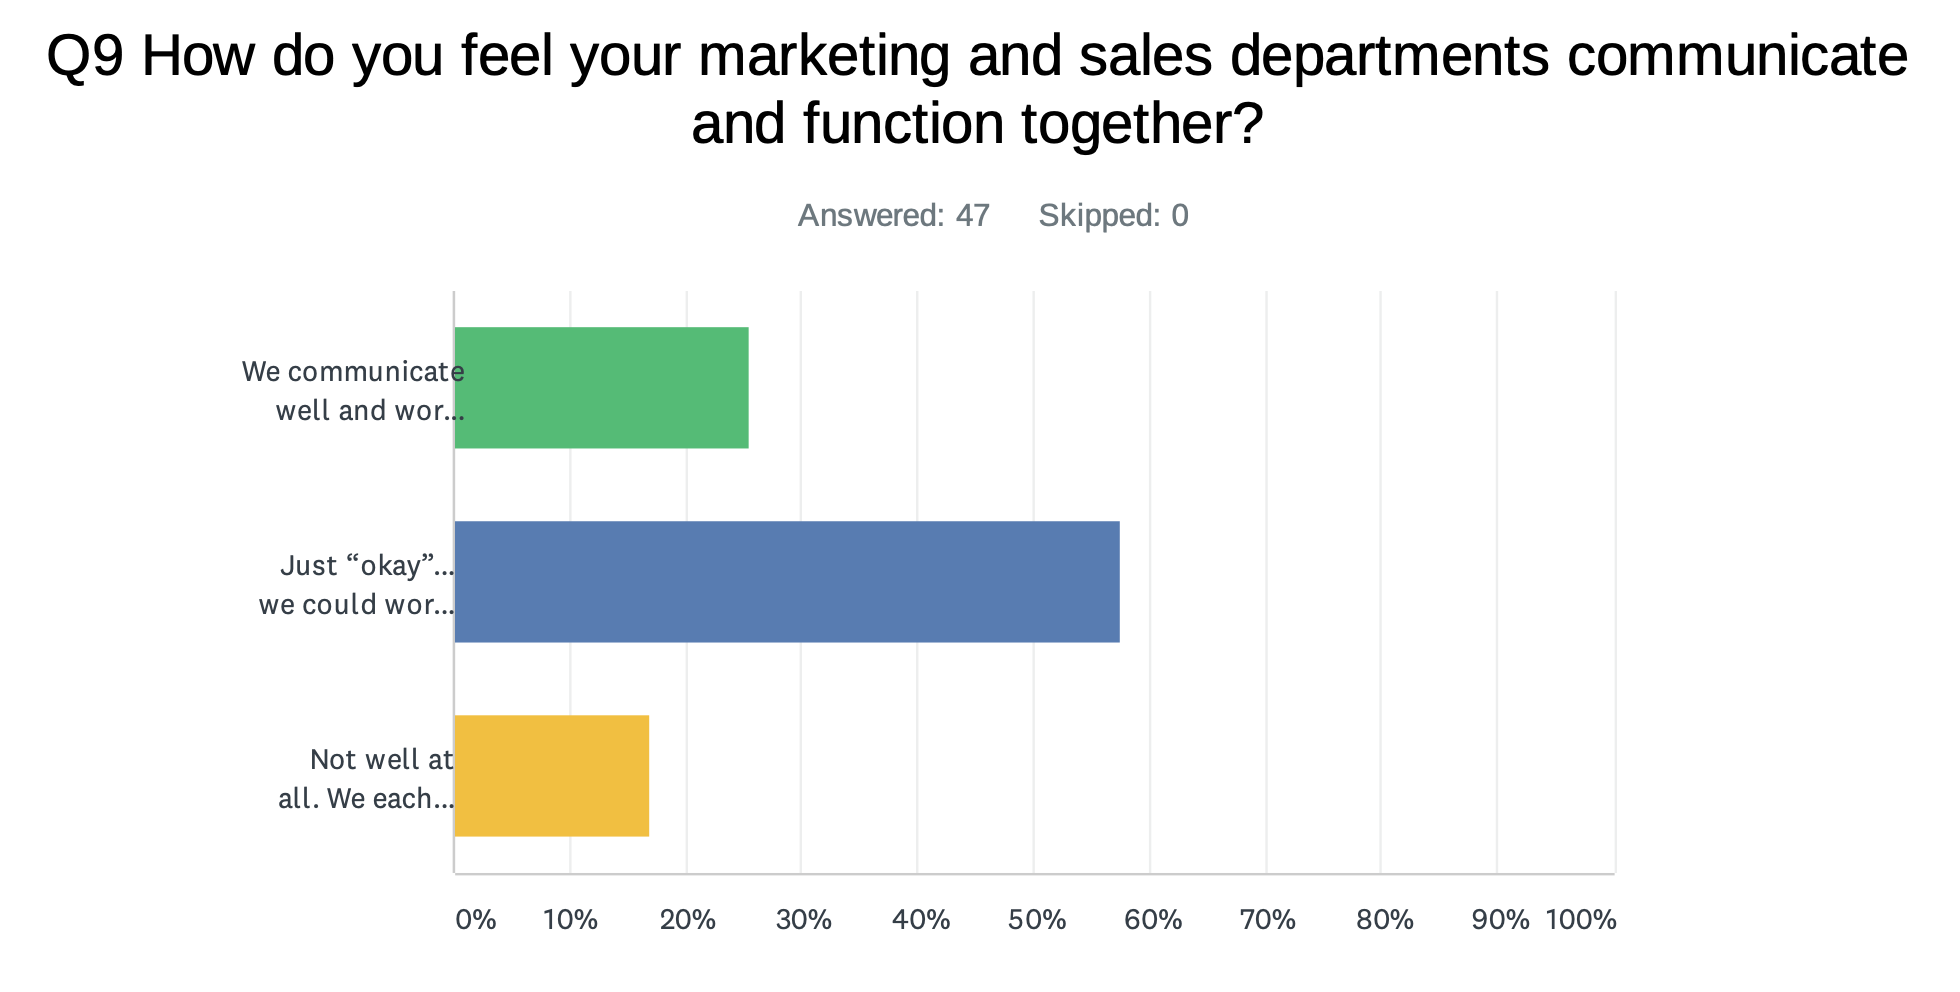 communication is important between sales and marketing